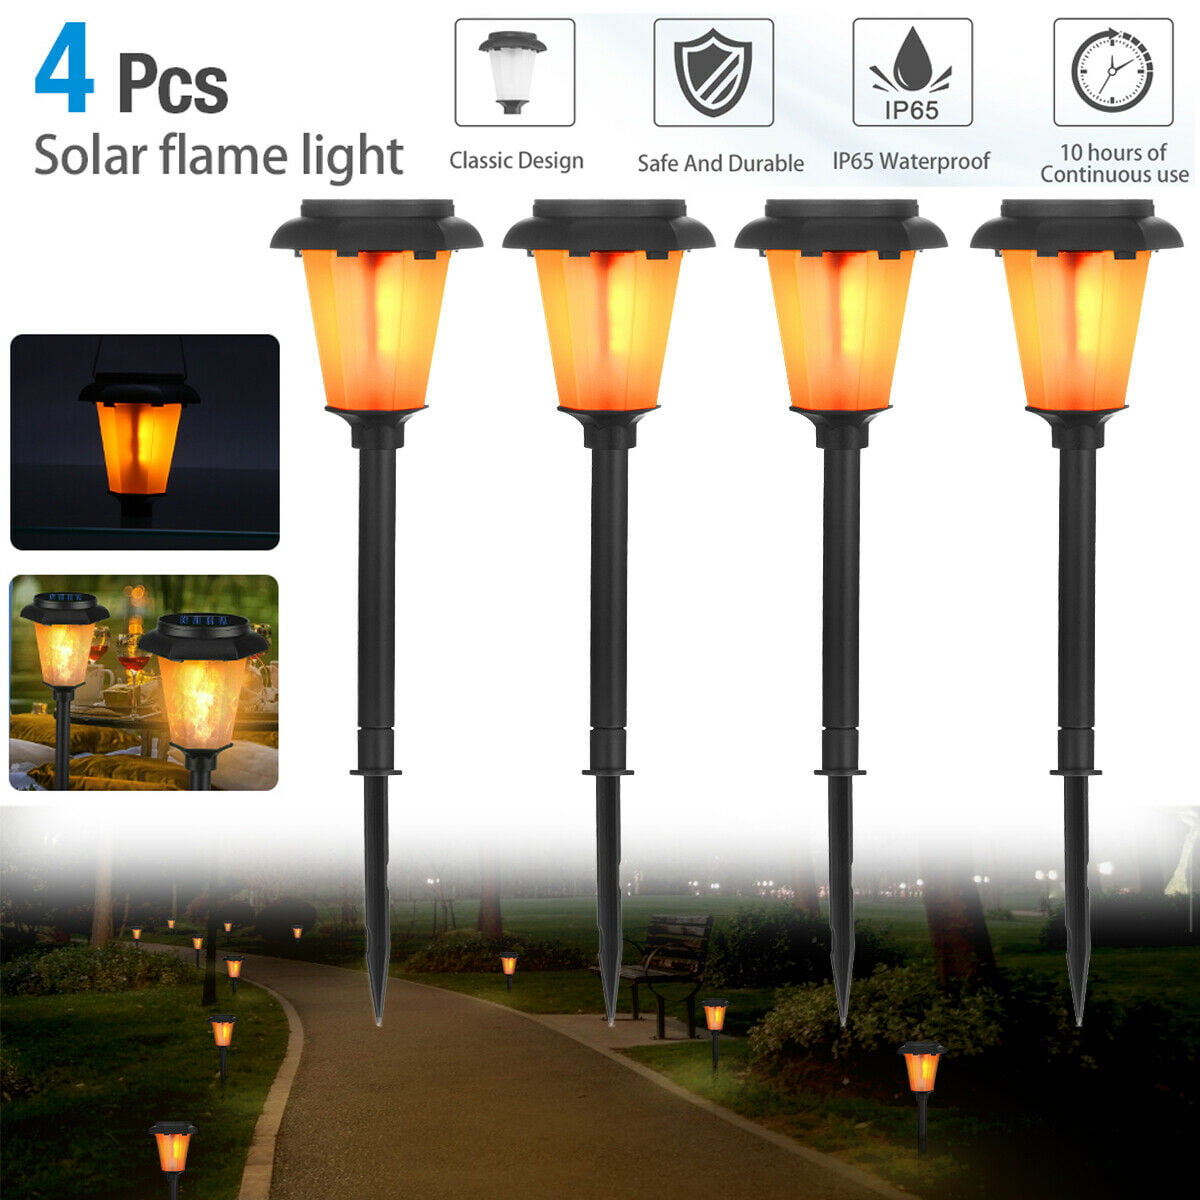 4x Flickering LED Solar Flame Torch Light Outdoor Garden Yard Lawn Pathway Lamp 